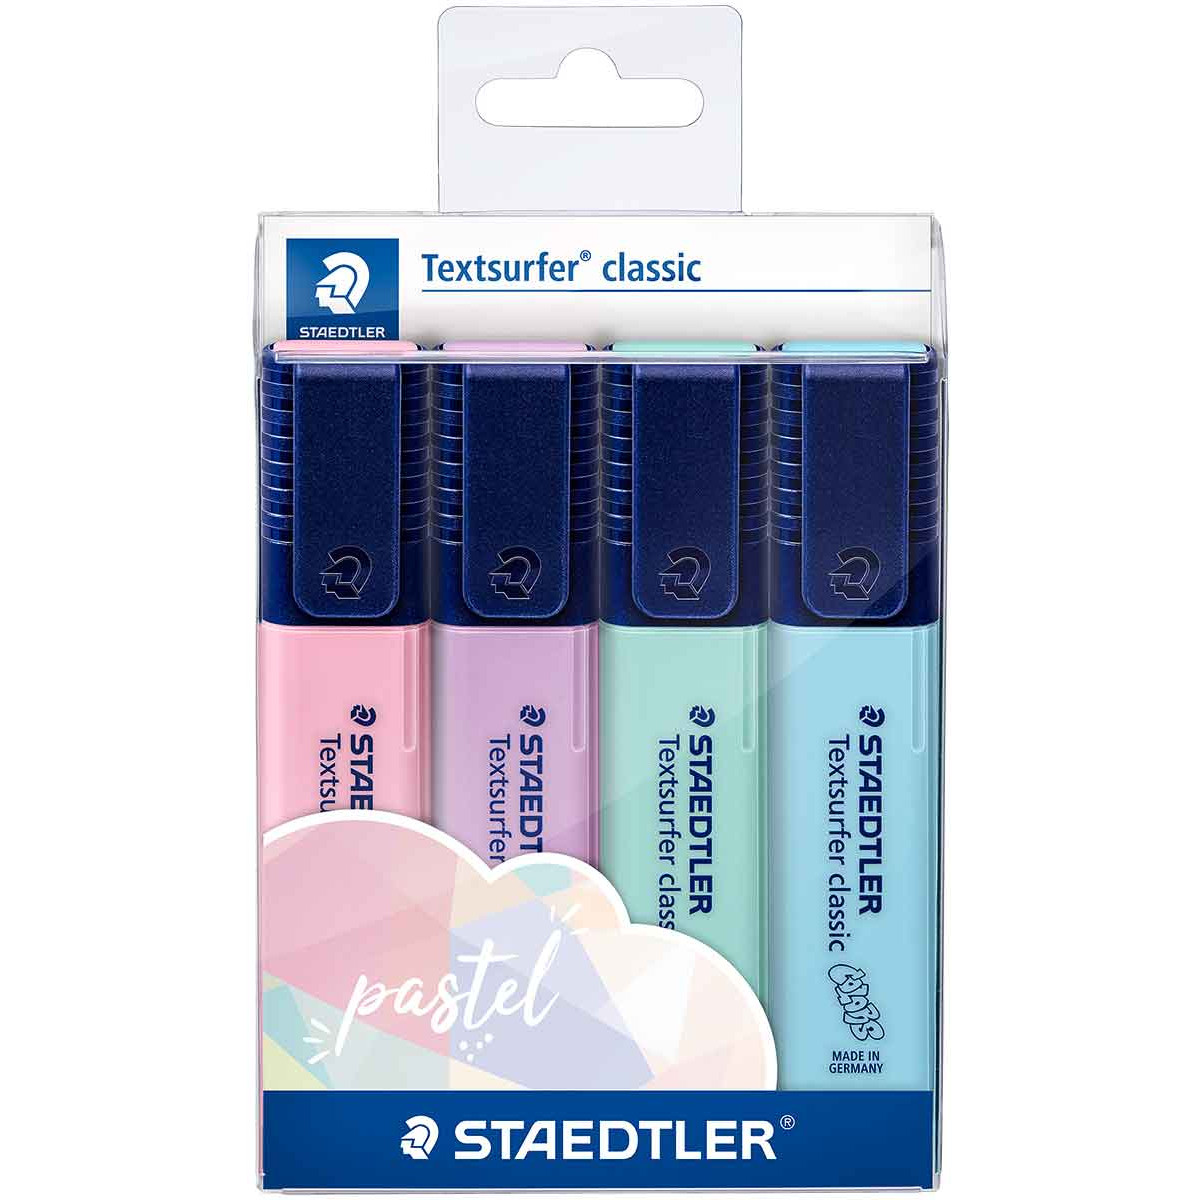 Staedtler Textsurfer Classic Highlighters - Assorted Pastel Colours (Wallet of 4)